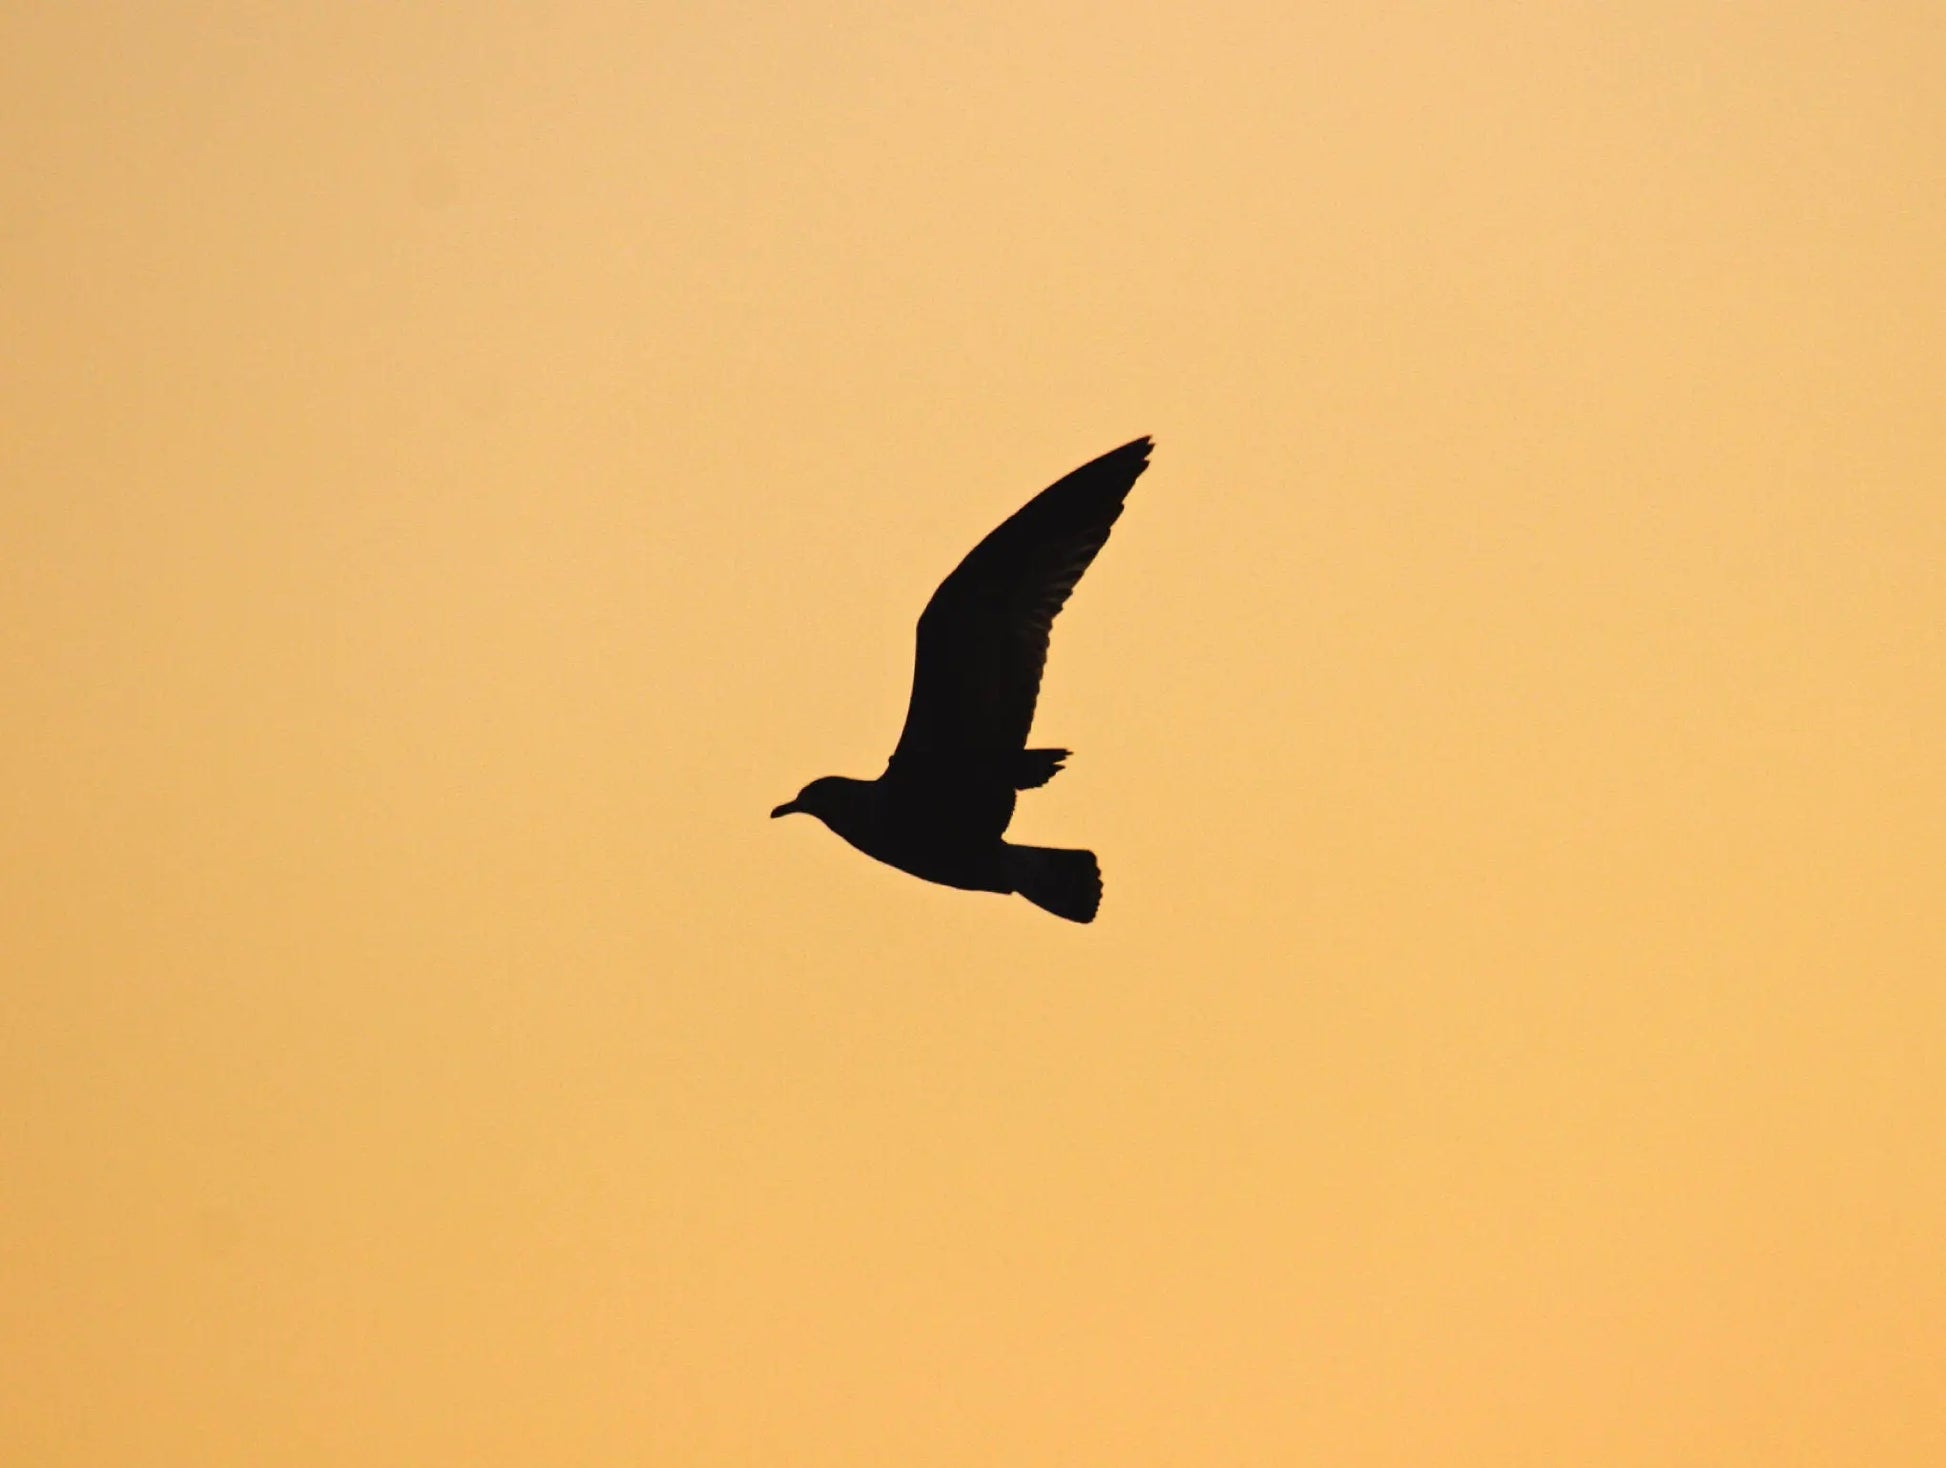 A photo of a lone gull soaring gracefully against a breathtaking golden sunset sky. The warm yellow hues create a dramatic backdrop for the dark silhouette of the gull, its wings outstretched as it flies towards the horizon.